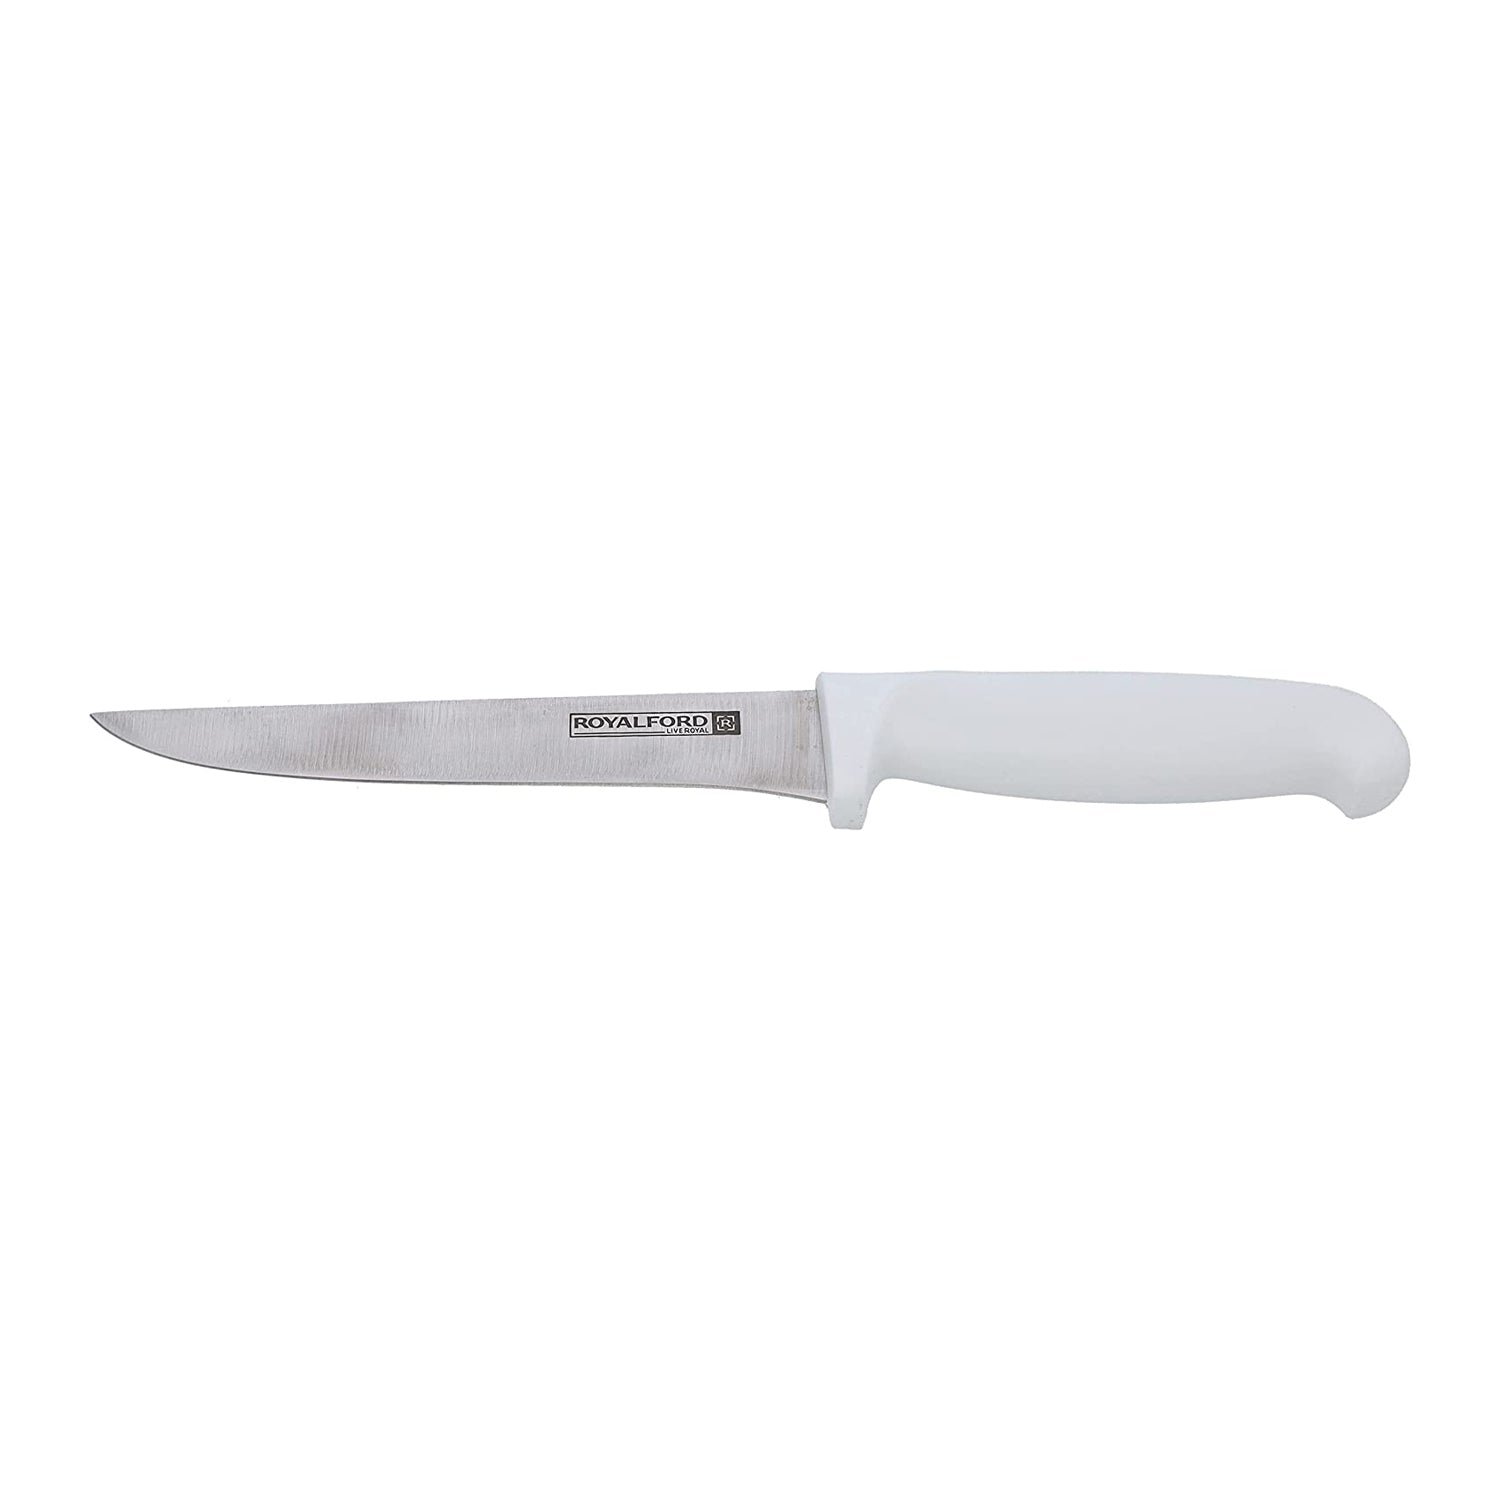 6" Bonning Knife Stainless Steel With PP Handle, RF10232 | Sharp Blade | Rust-Resistant | Durable & Strong | Knife For Cutting Vegetables, Meat, Fruits